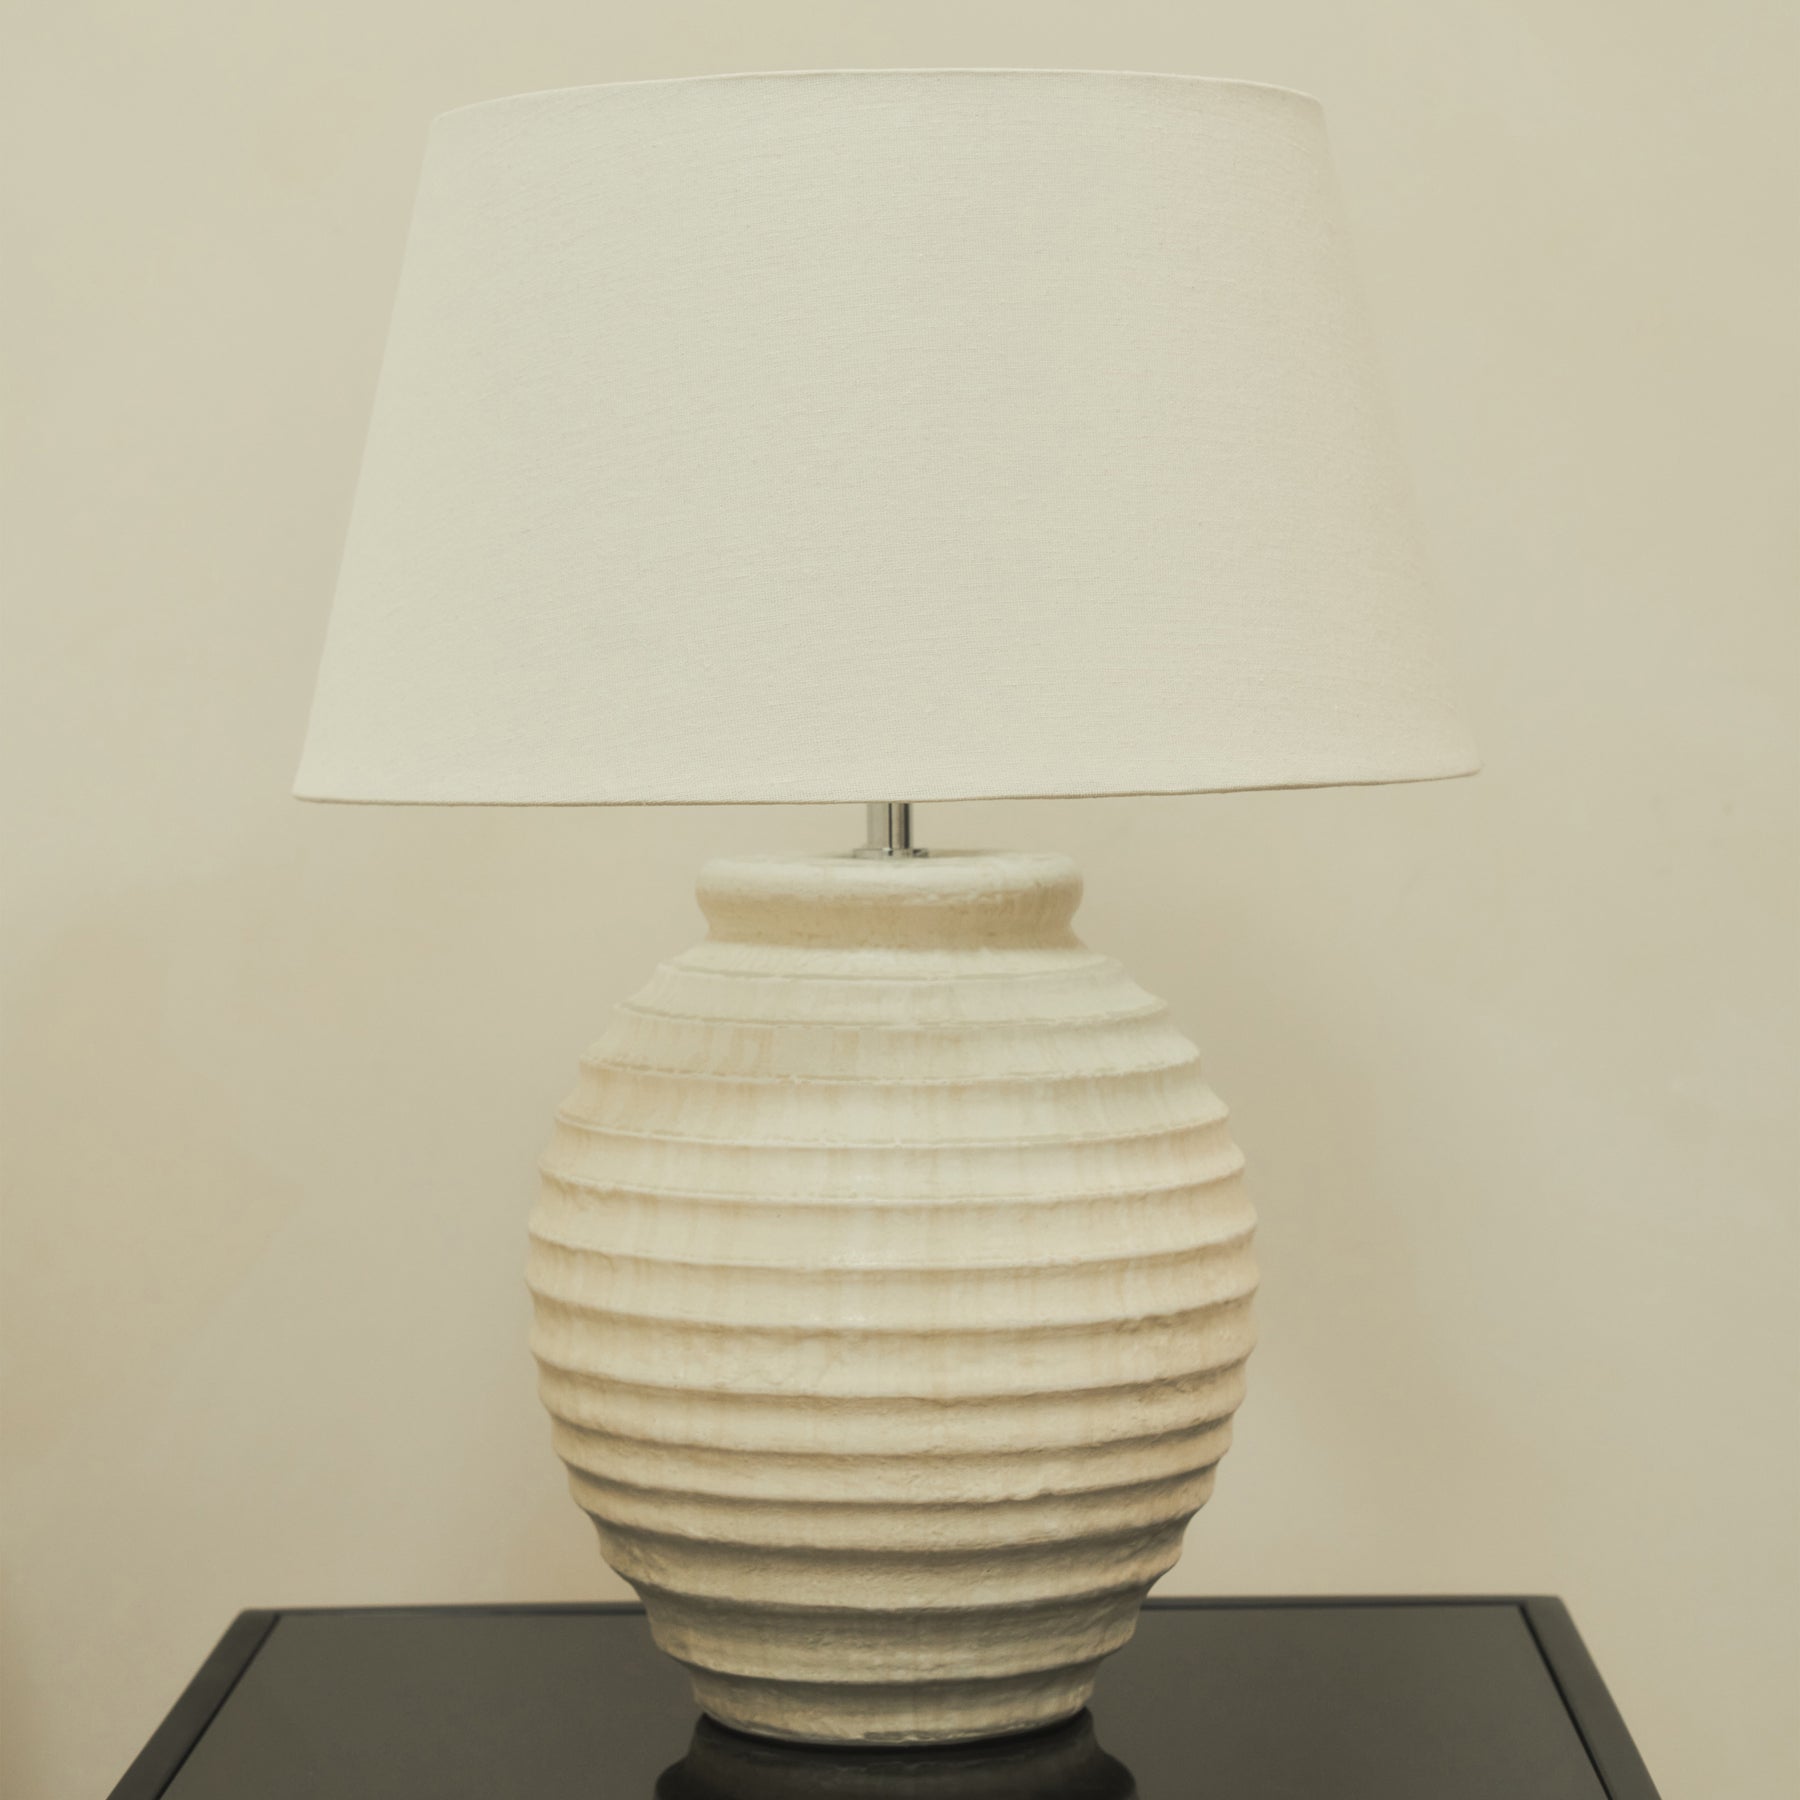 Textured Ceramic Based Table Lamp Natural Shade in lounge